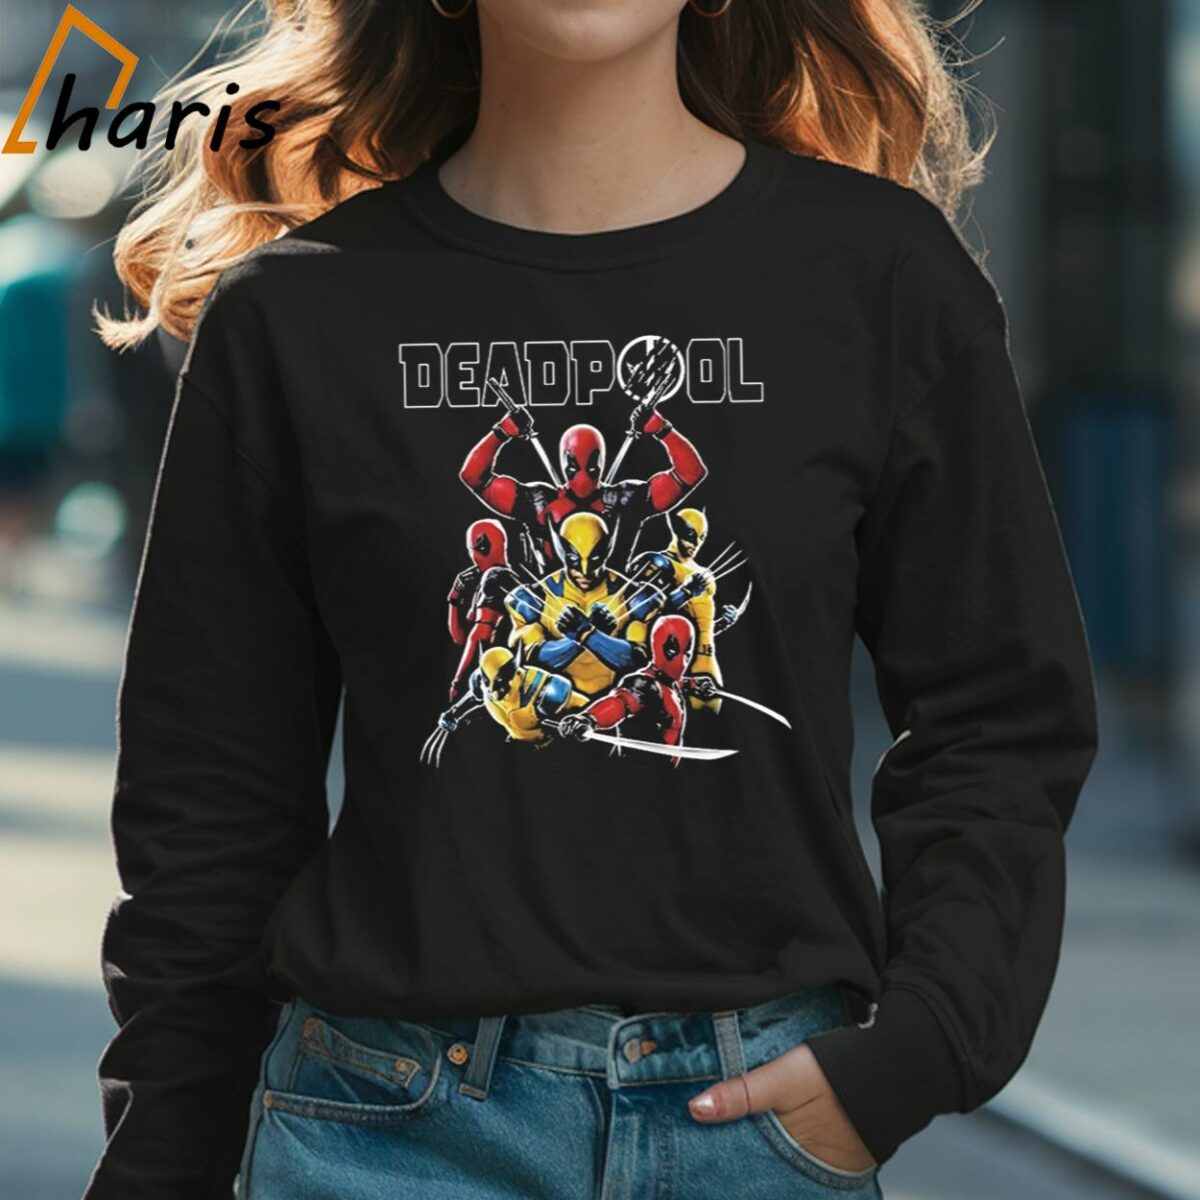 Promotional Art For Deadpool And Wolverine T Shirt 3 Long sleeve shirt